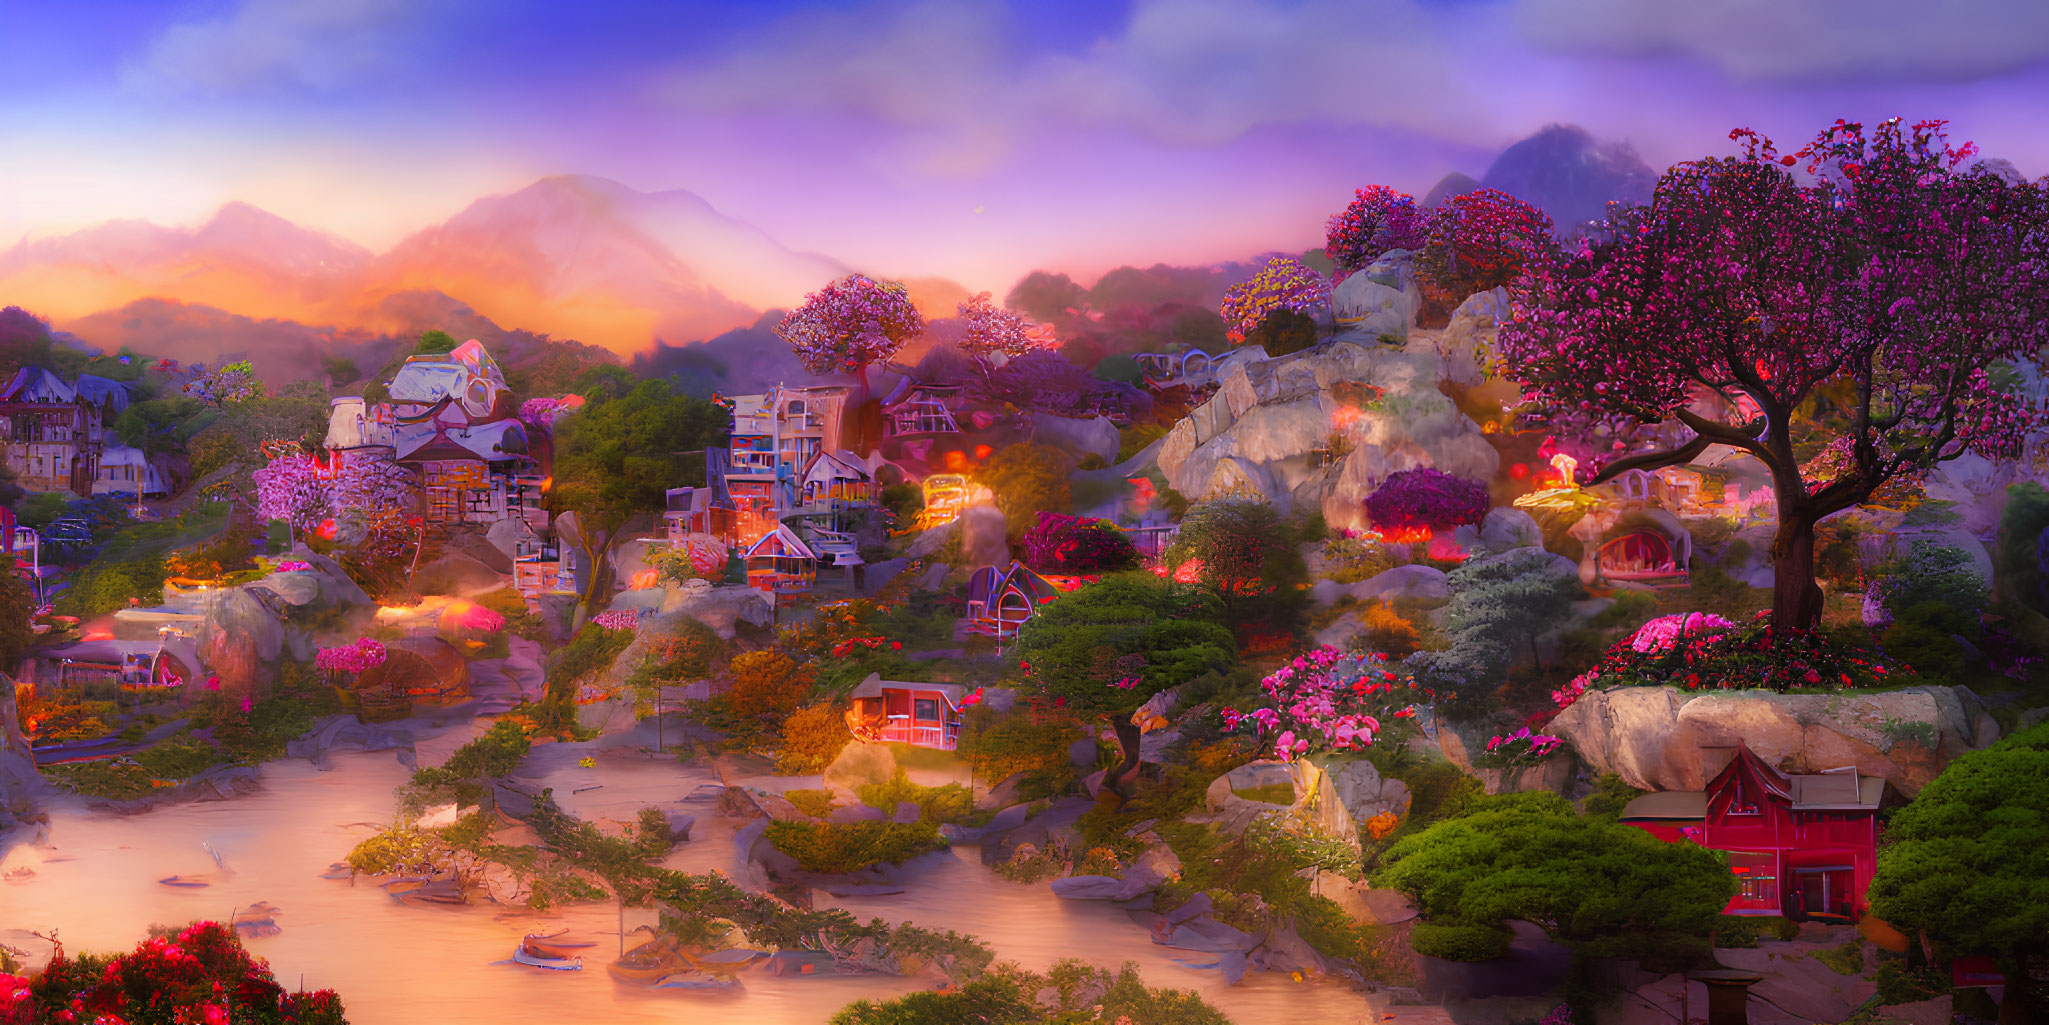 Whimsical fantasy village with pink-flowering trees and misty mountain backdrop